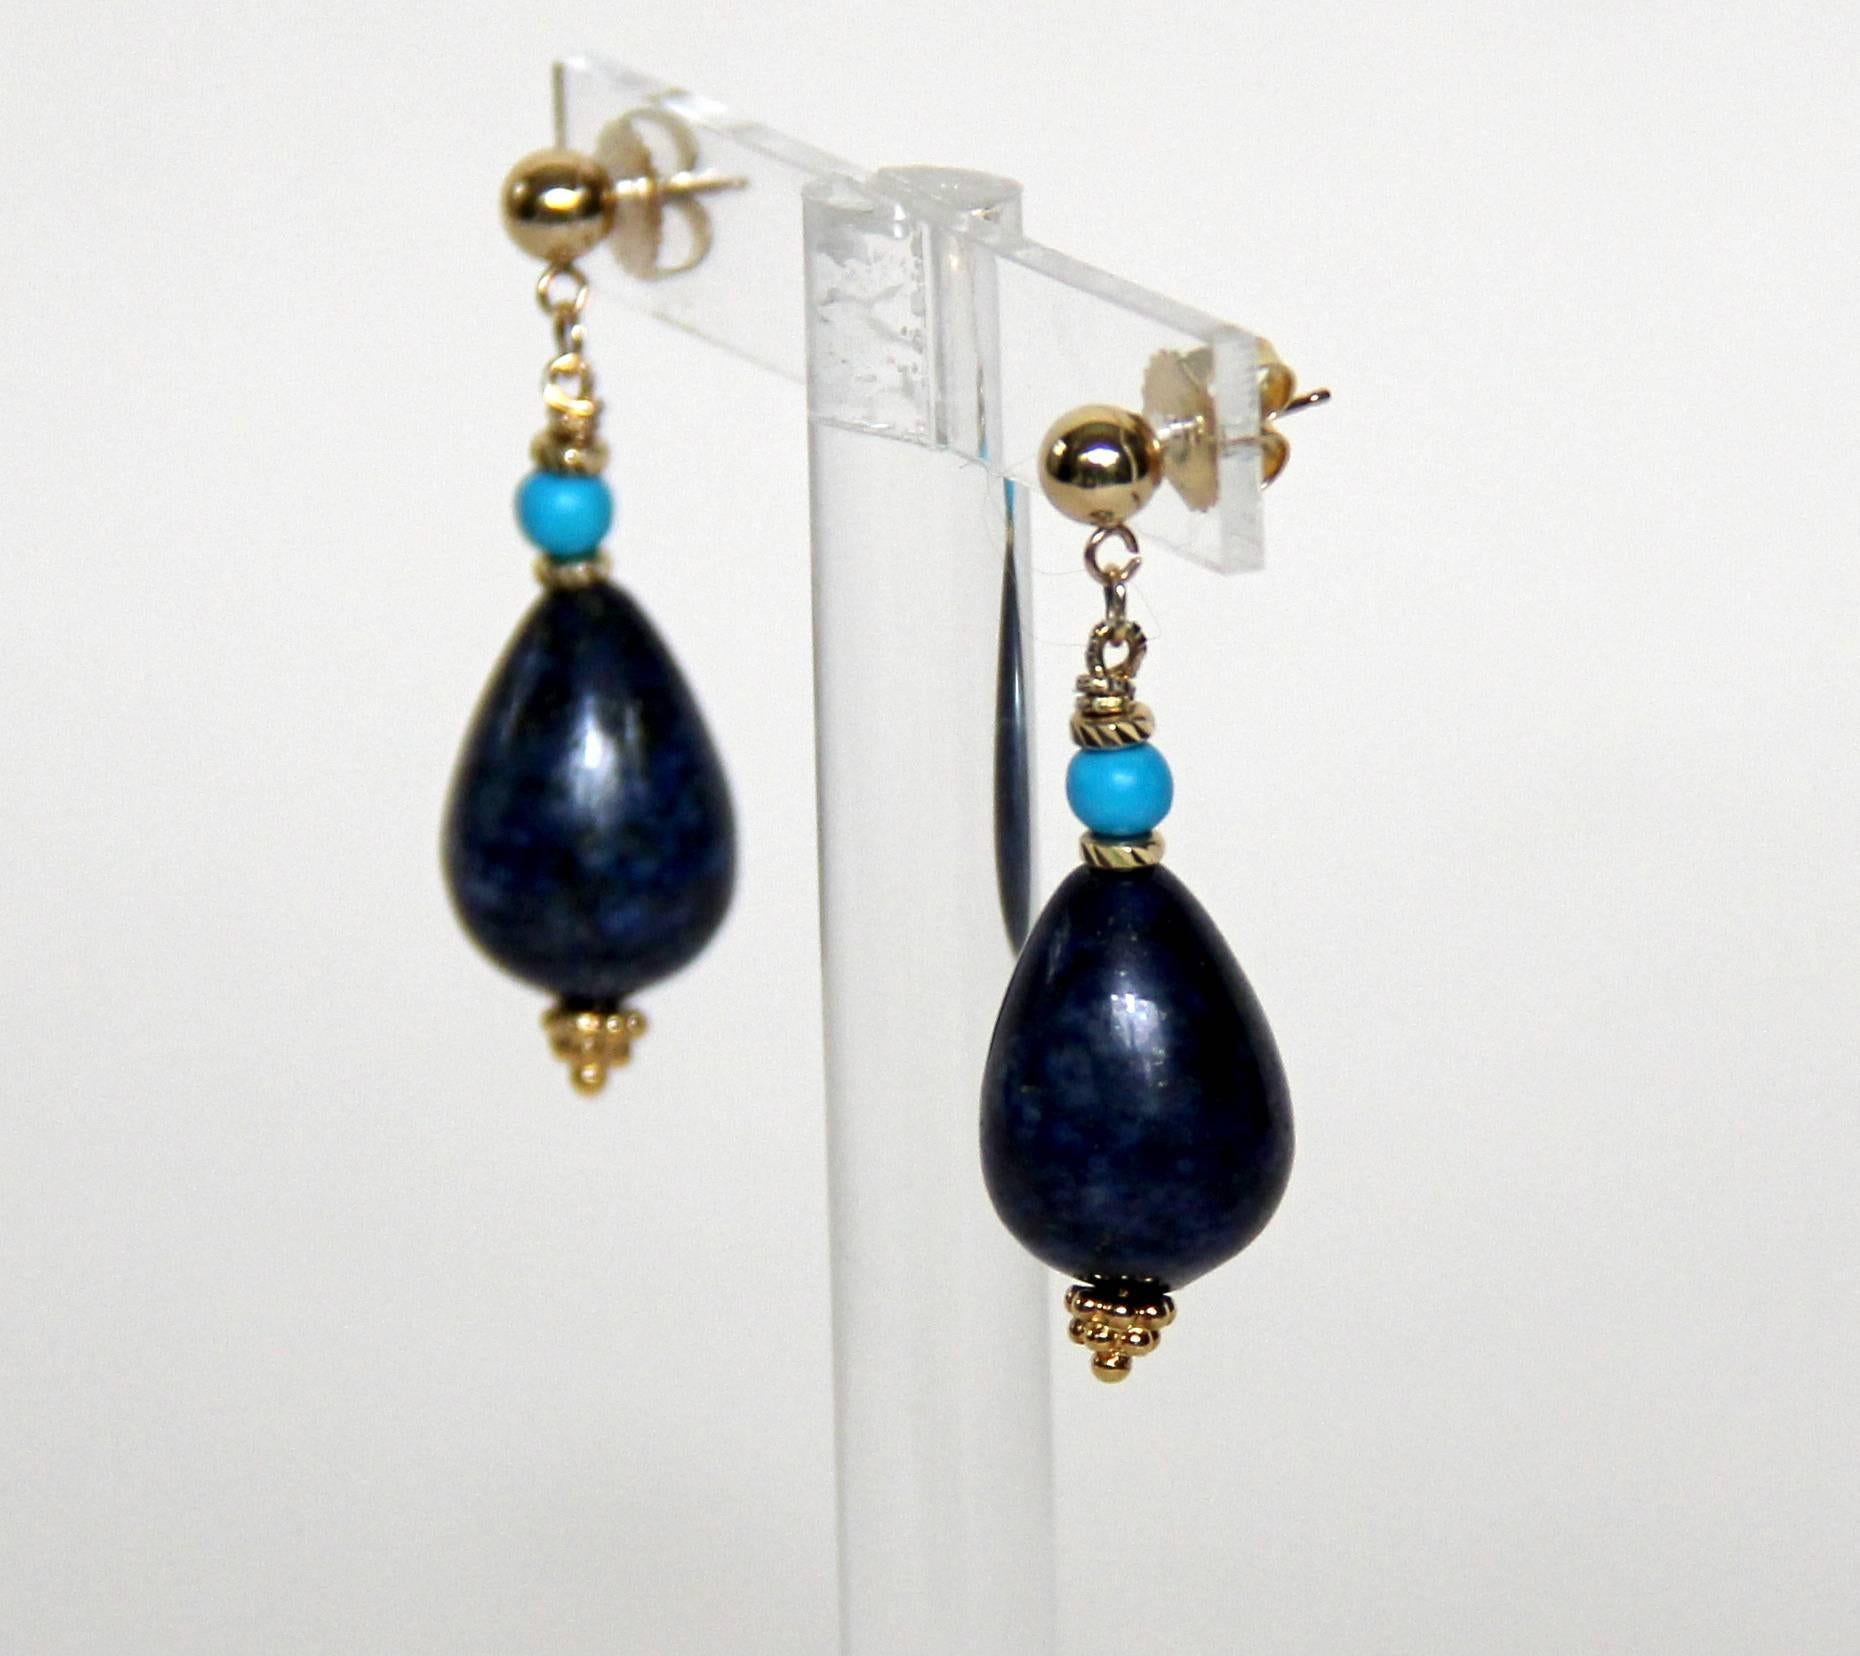 This elegant earrings showcase a centerpiece of 20 x 12 mm pear-shaped solid  Lapis Lazuli accented by 14K yellow gold and turquoise bead. This elegant composition is held by 14K yellow gold ear-studs.
Each earring is 1.5 inch long.